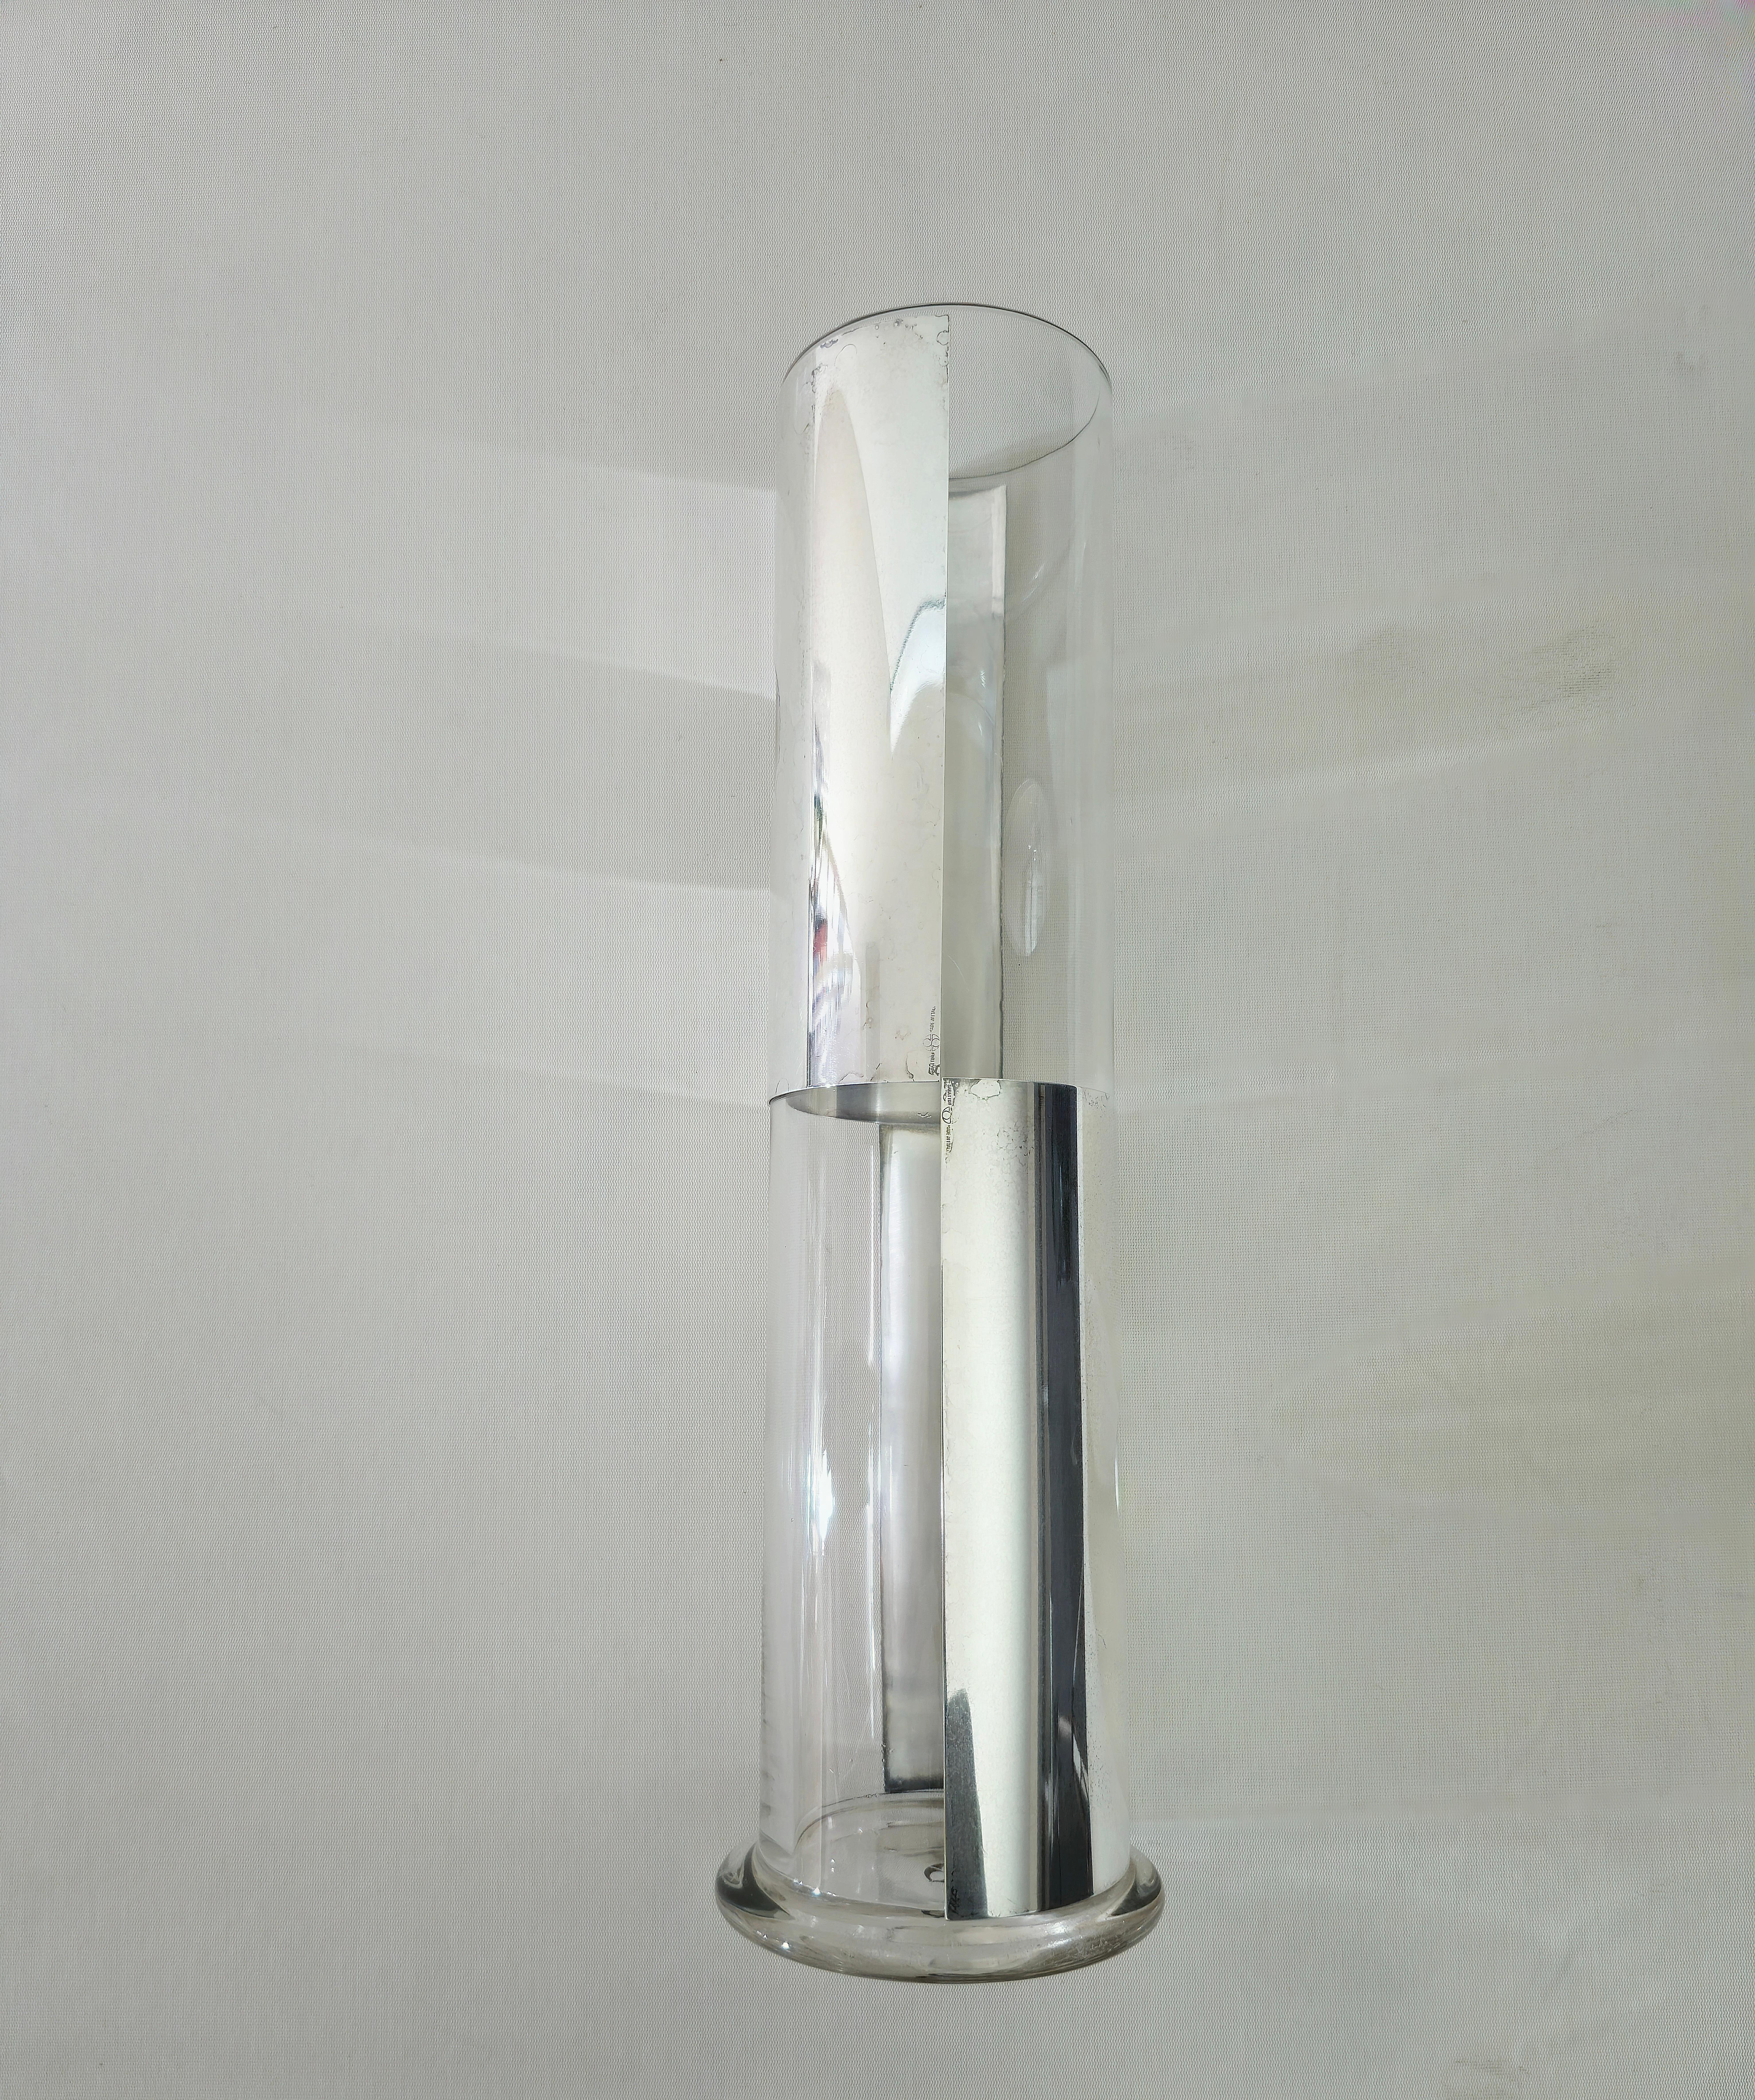 Glass and silver metal vase by Lino Sabattini, 1970s Design Italy Midcentury For Sale 5